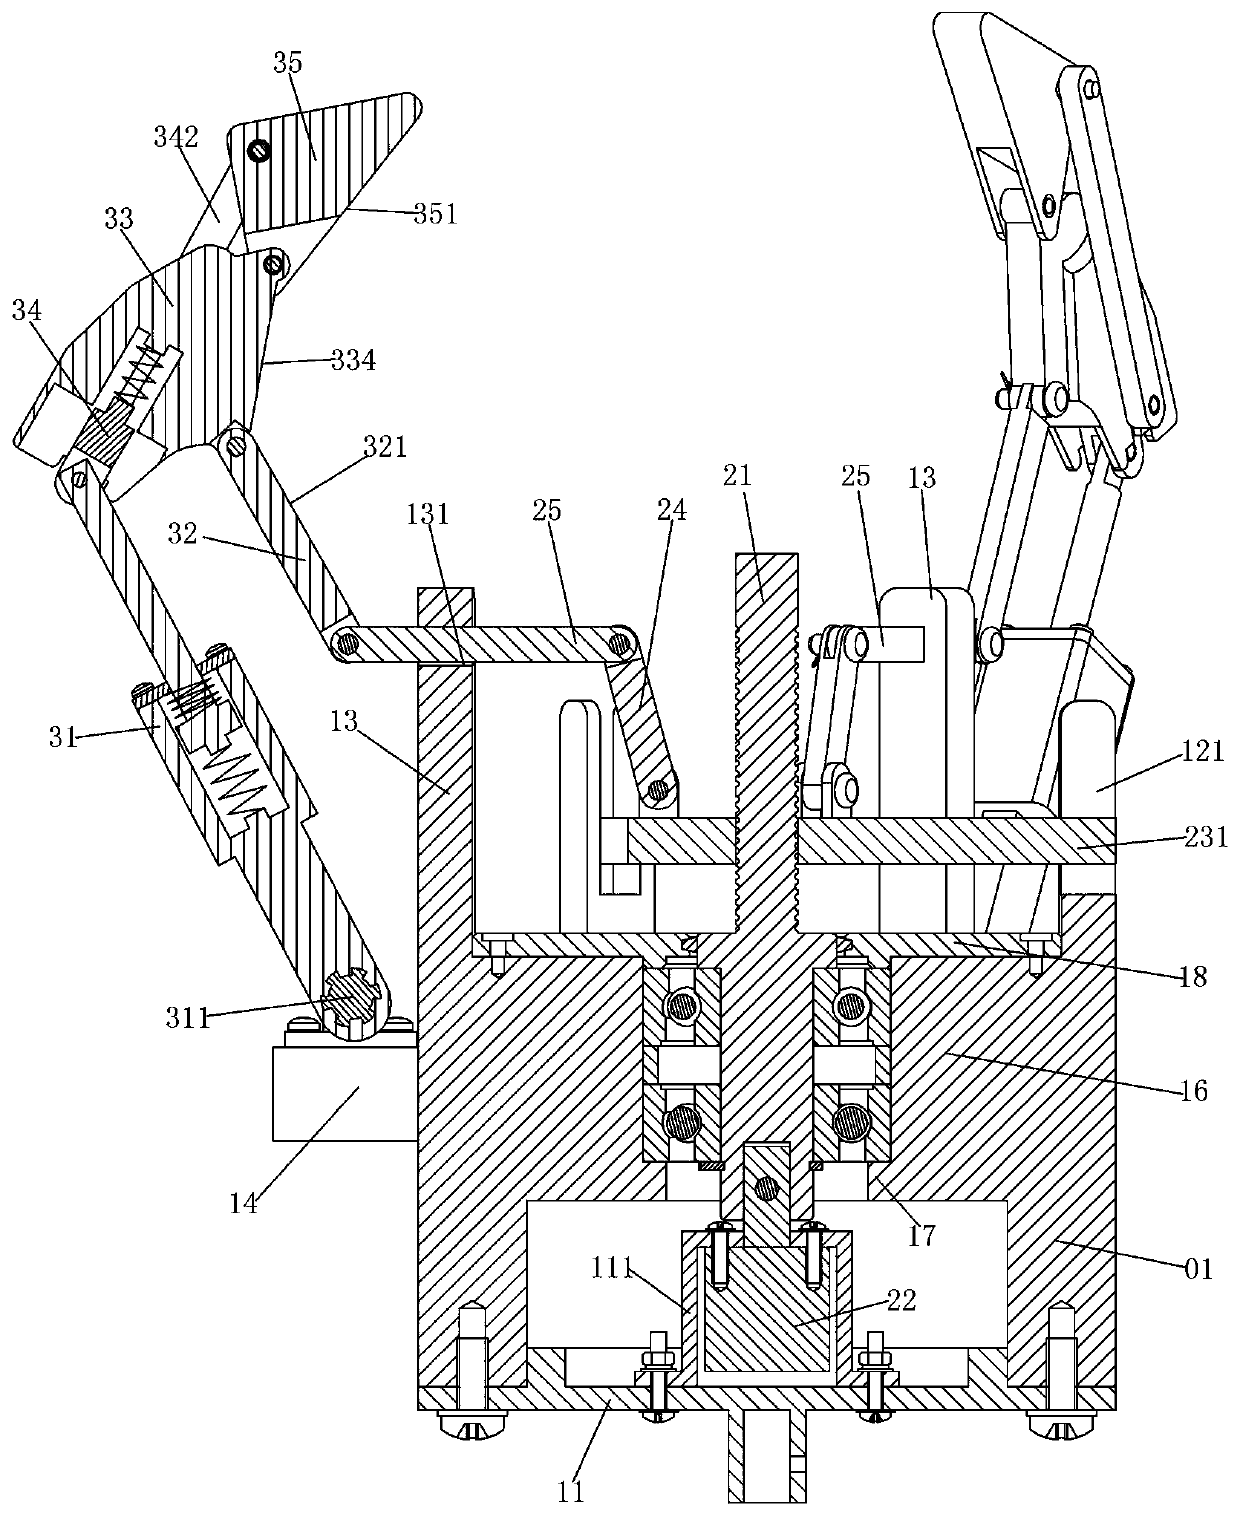 Underactuated finger combination mechanism for changing enveloping space by radially adjusting swing rod fulcrums